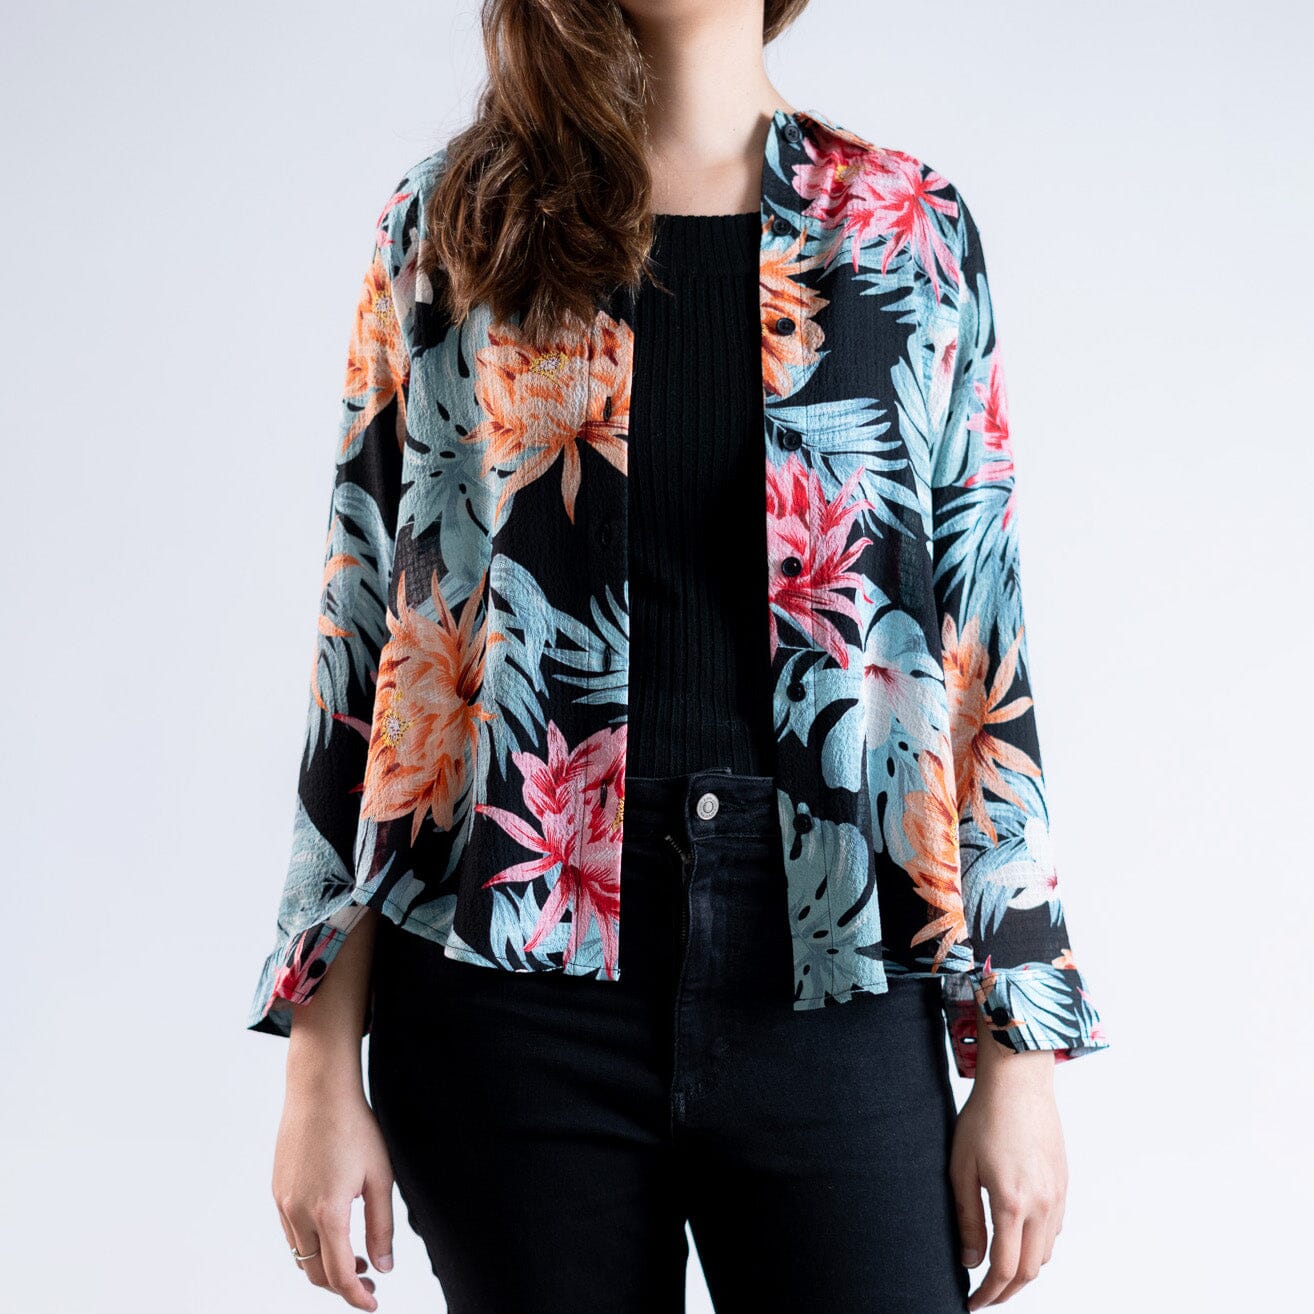 East West Women's Floral Printed Casual Shirt Women's Casual Shirt East West Black & Turquoise XS 